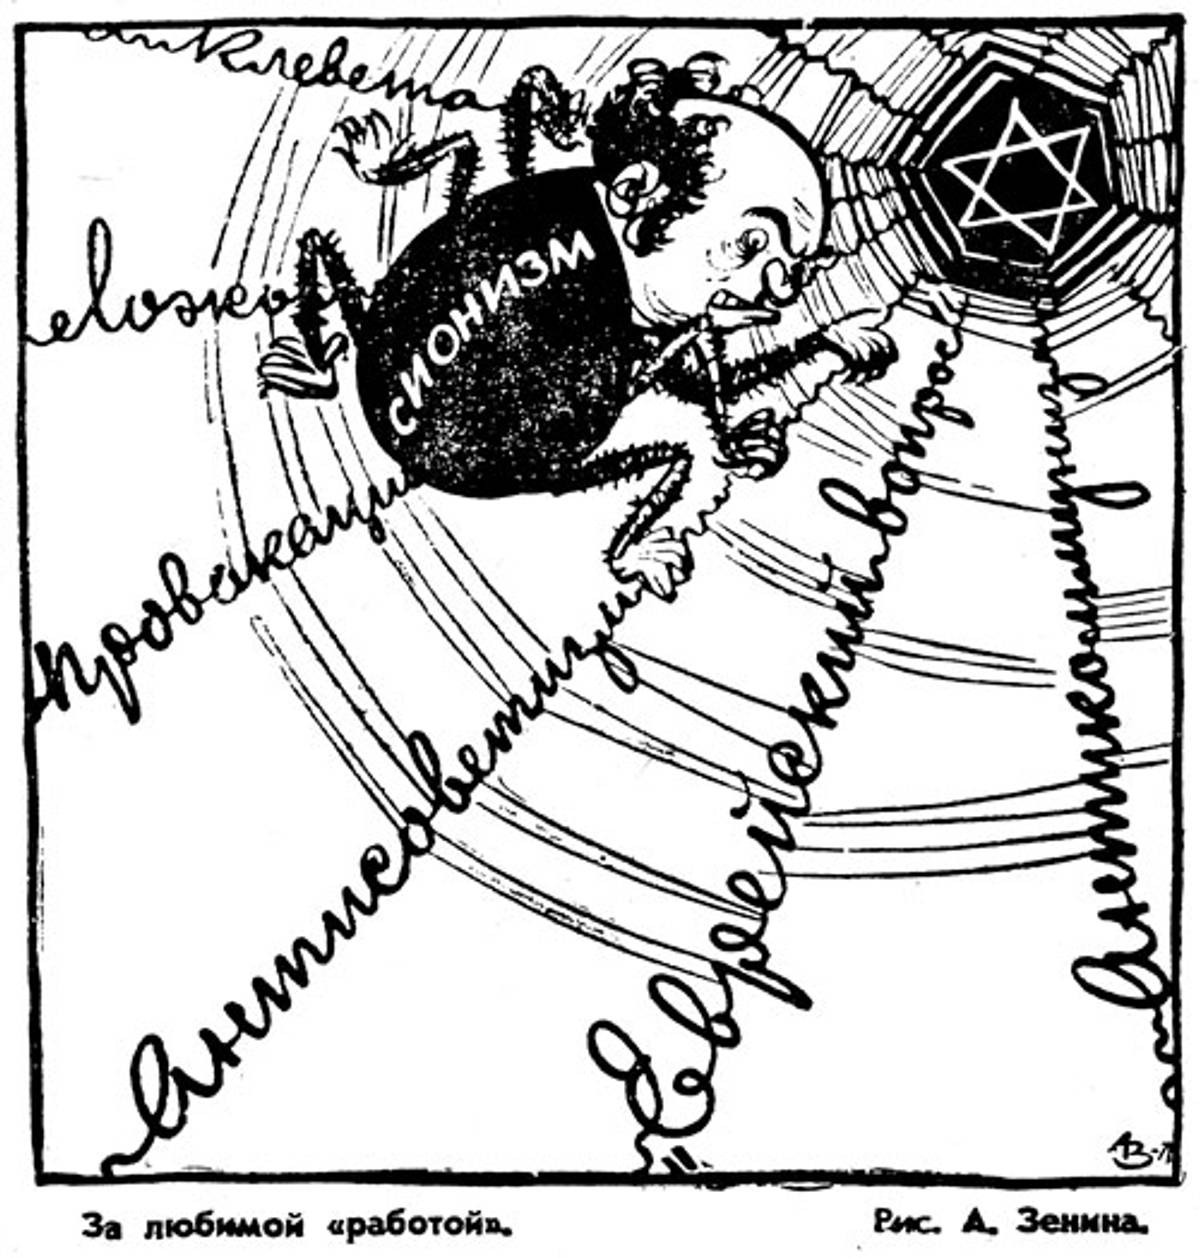 Fig. 7: ‘At his favorite work,’ A. Zenin, Sovietskaya Moldavia, Aug. 29, 1971. The cartoon is titled ‘A Zionist Cobweb Spider.’ (From The Israeli-Arab Conflict in Soviet Caricatures, 1967–1973 by Yeshayahu Nir, Tcherikover Publishers, 1976)